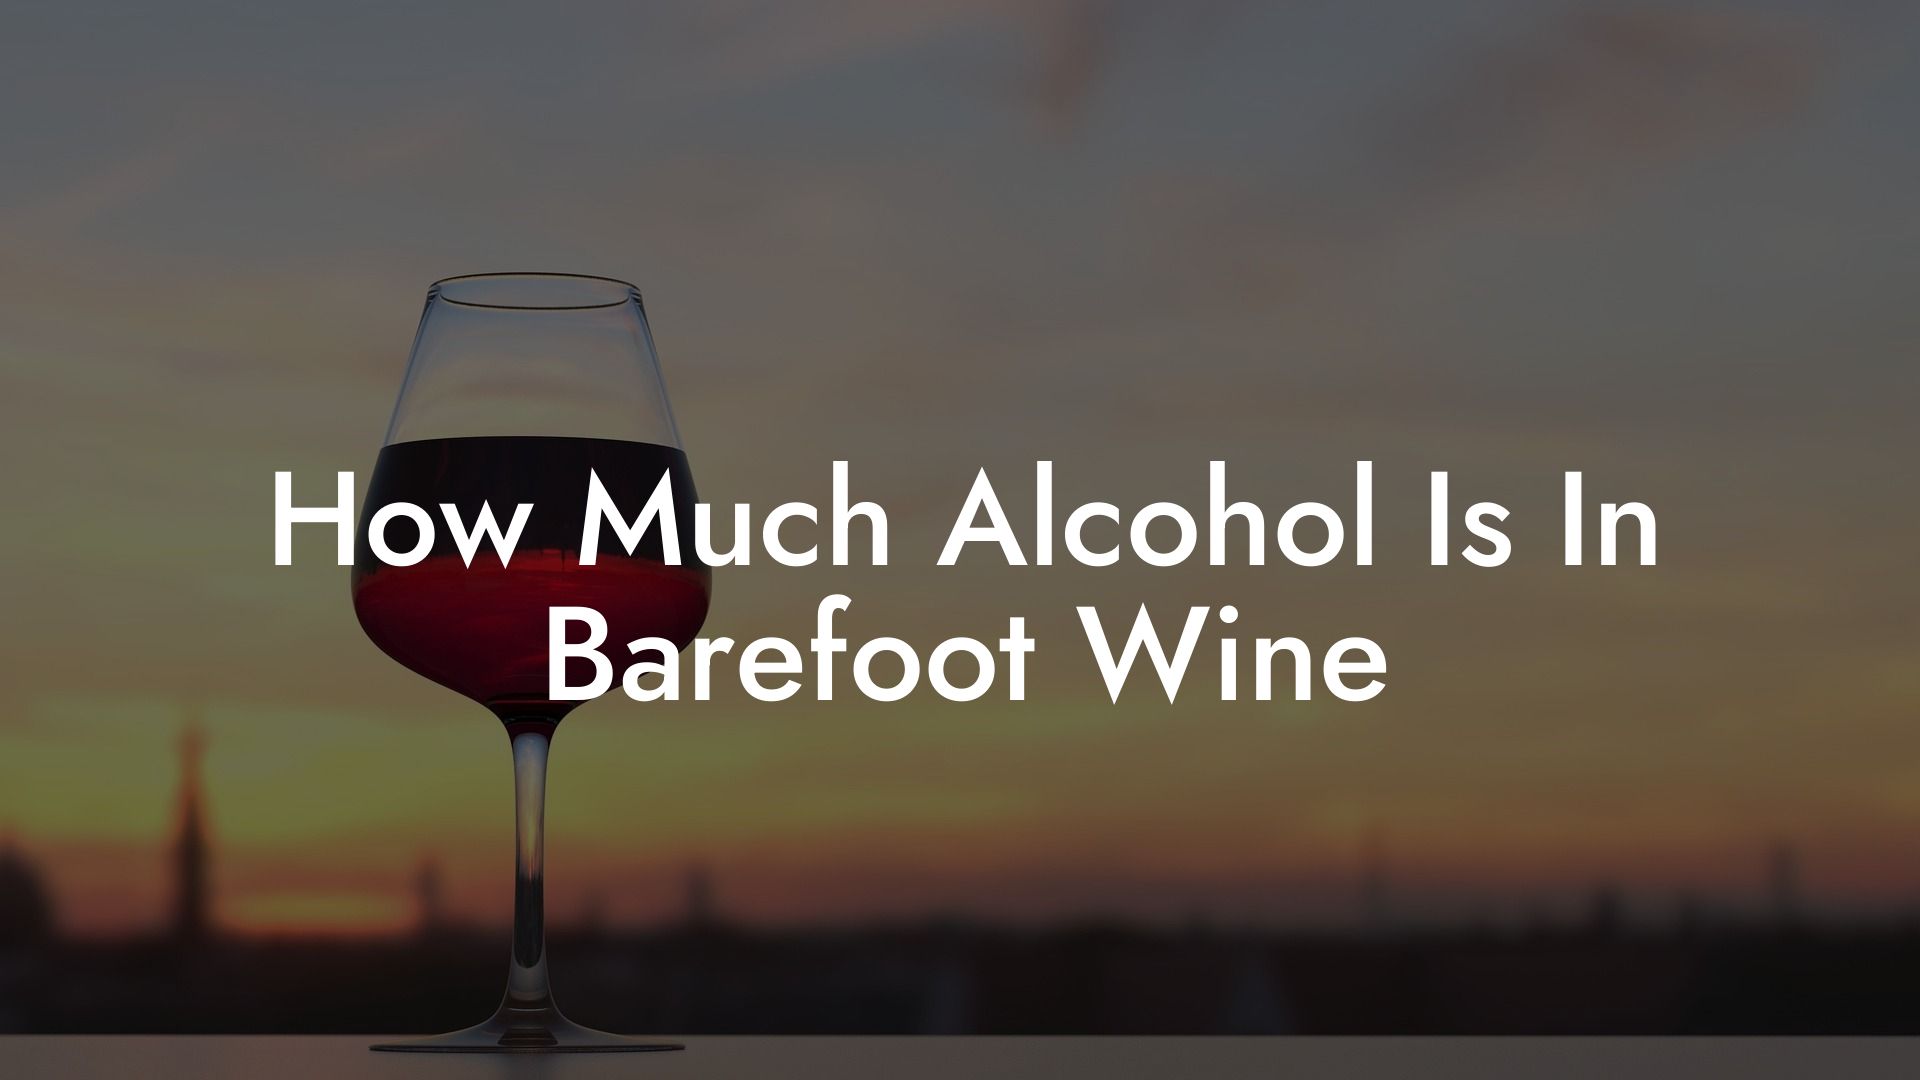 How Much Alcohol Is In Barefoot Wine